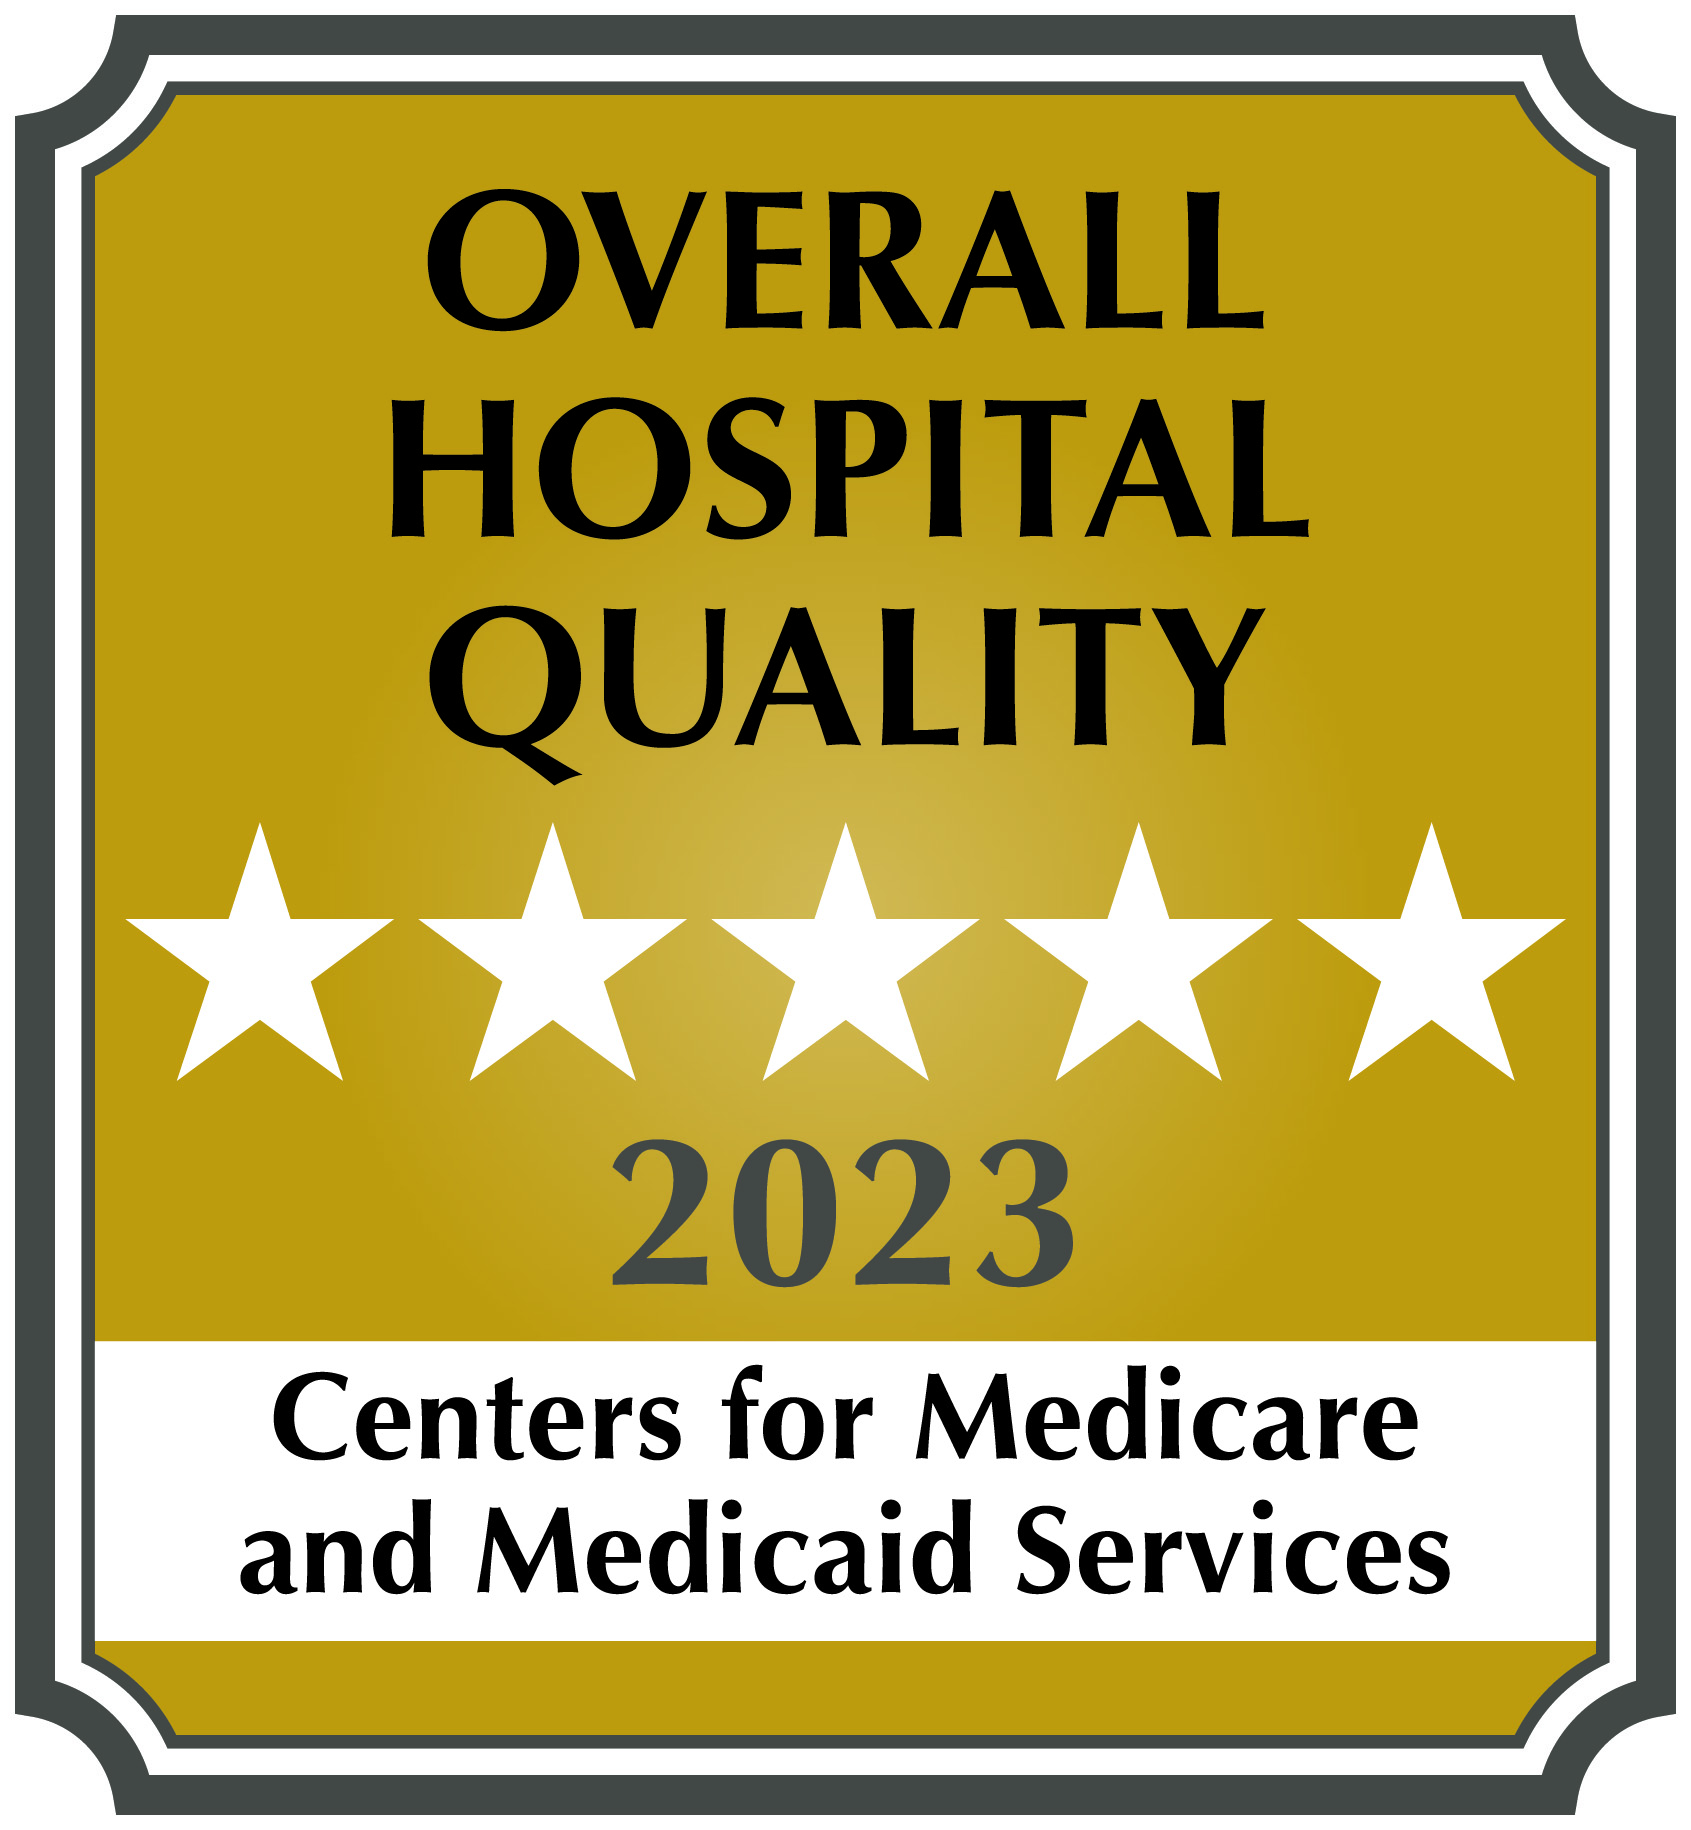 Overall Hospital Quality 2023